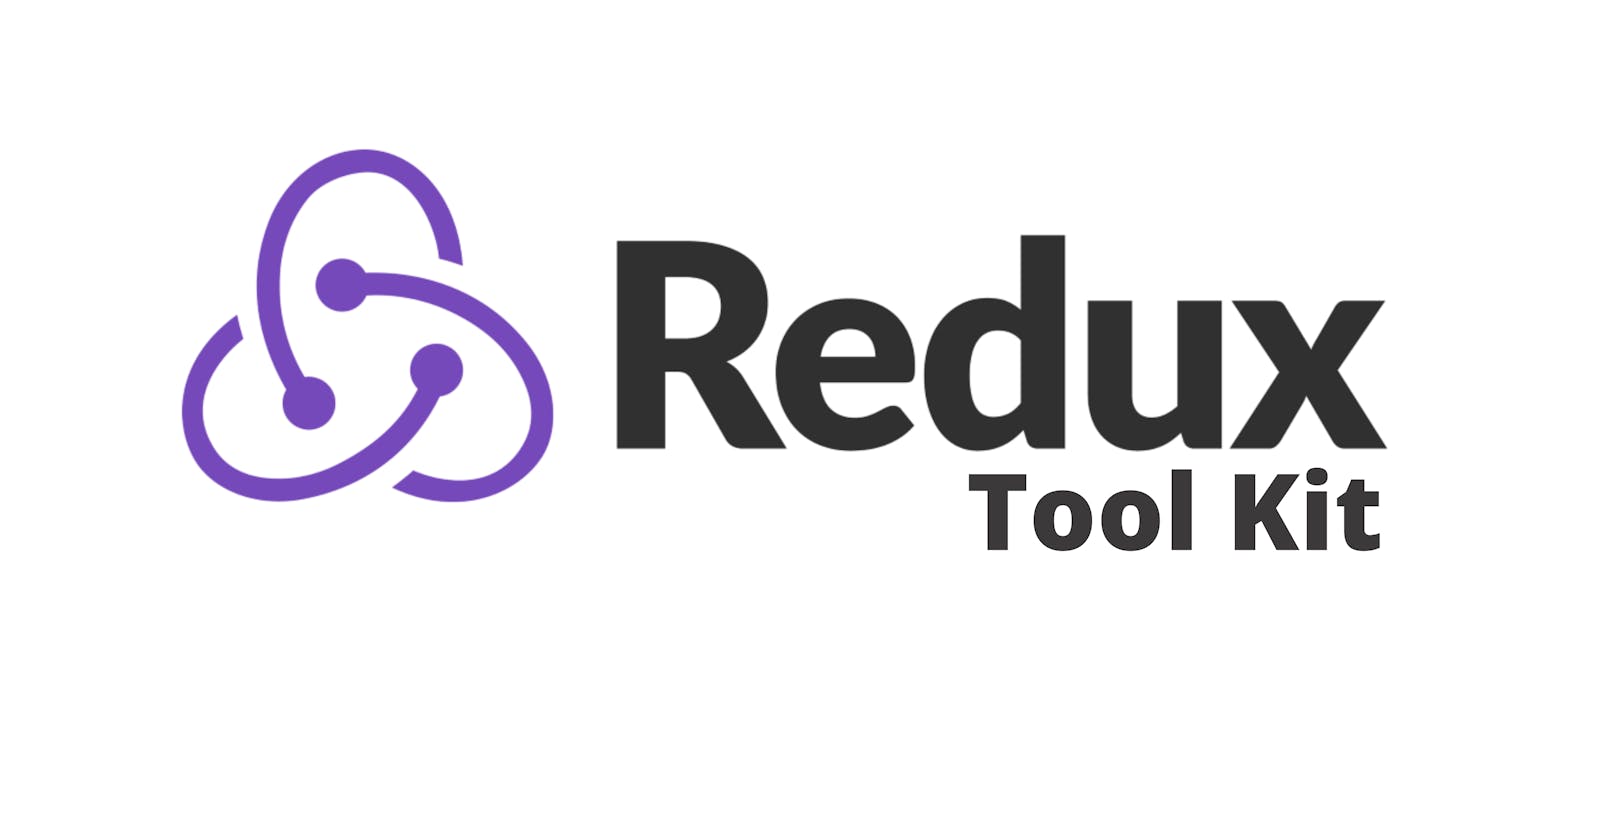 Redux Toolkit: What it is and How to use it